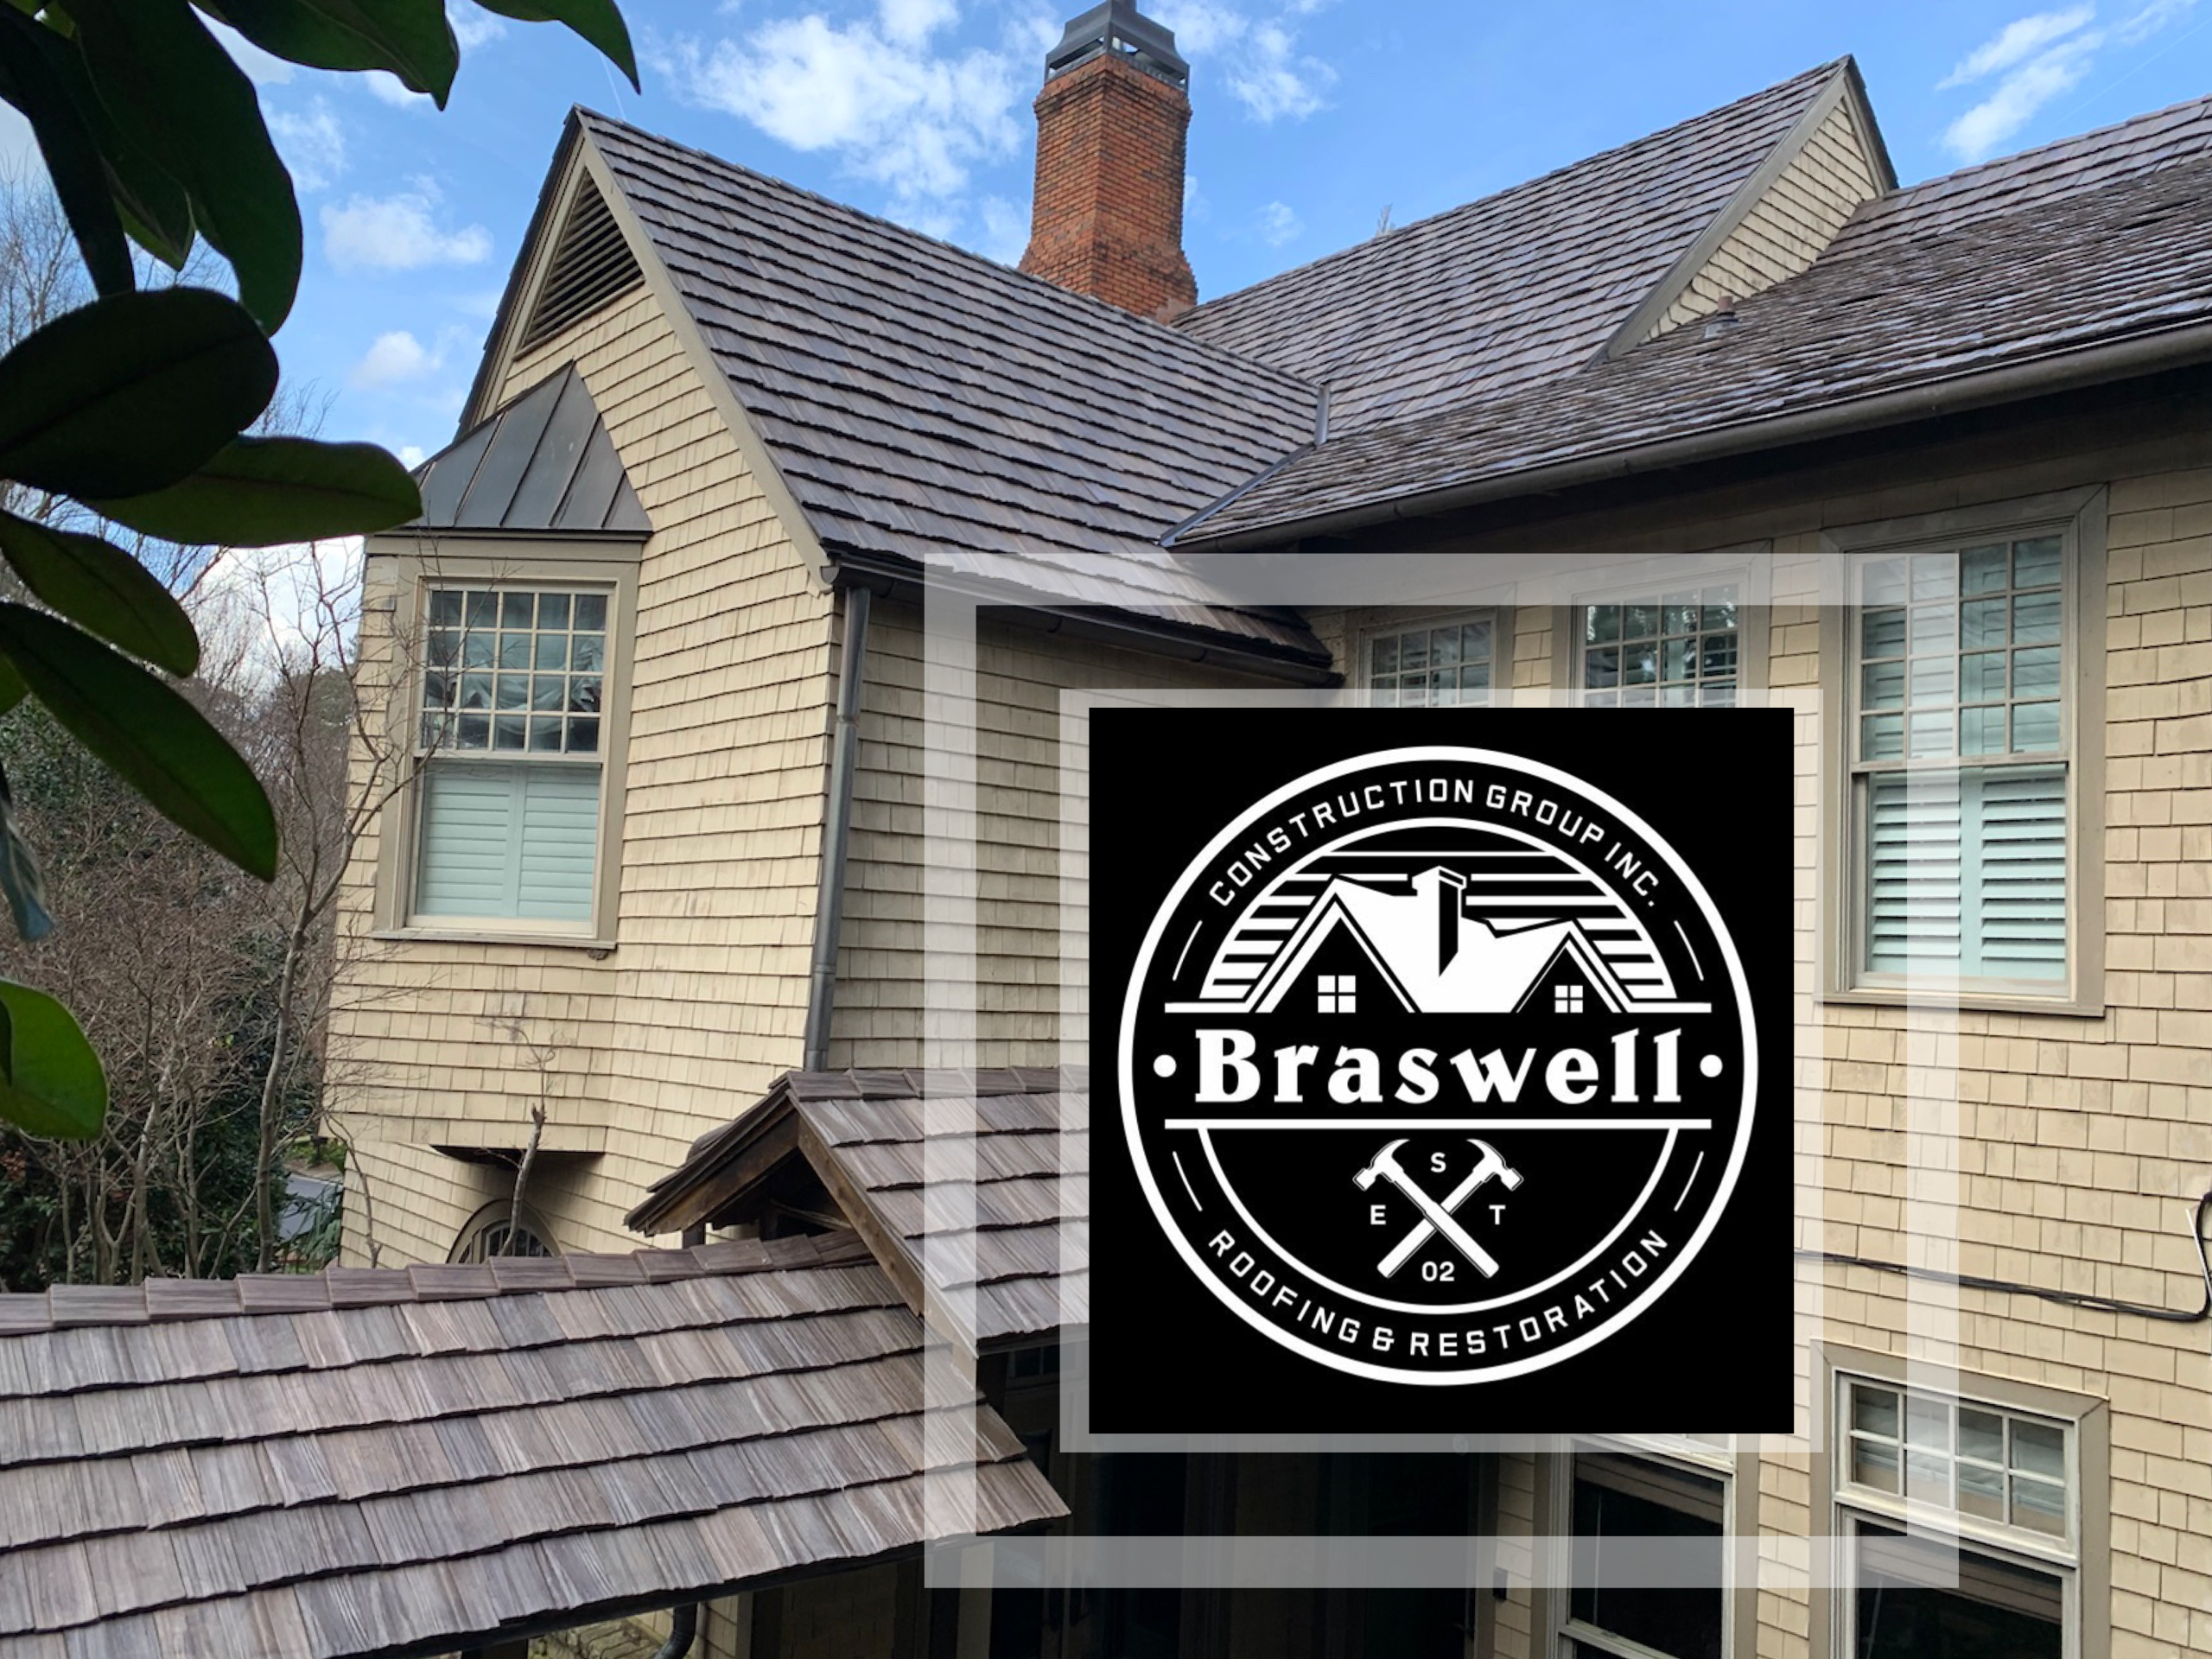 Best Brava Roofer of Atlanta, Braswell Development Group, Facilitates the Acceptance of Brava Synthetic Shake Roofs in the Luxury Longleaf Group